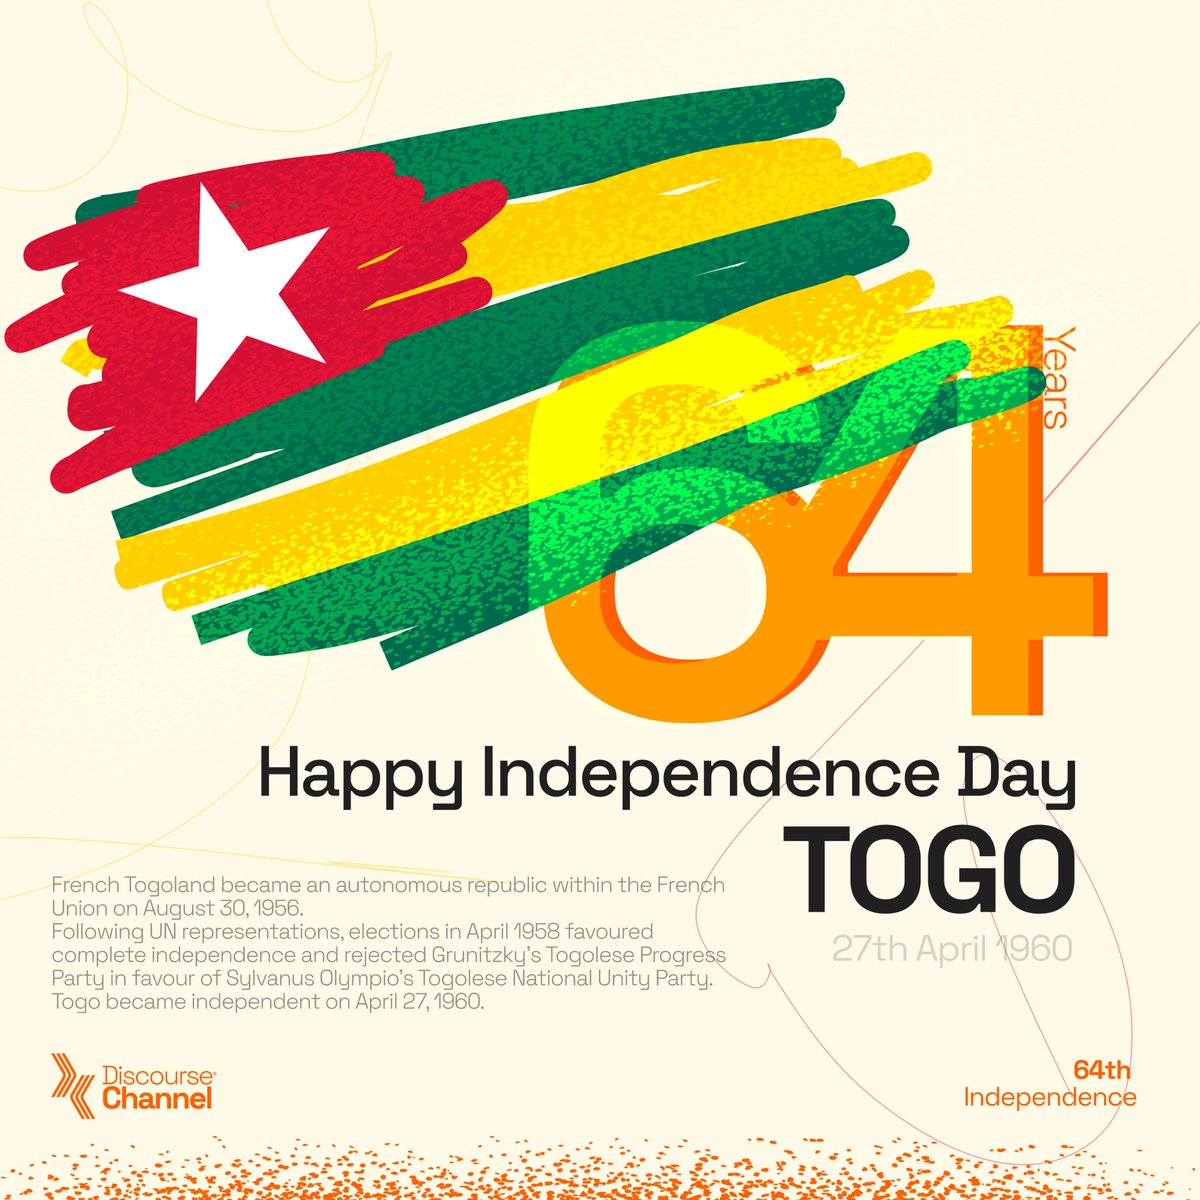 Happy independence day Togo, celebrating 64 years of independence and unity.

Join us as we celebrate with them together.

#africandiscoursechannel #togoindependence #africa #africaunite